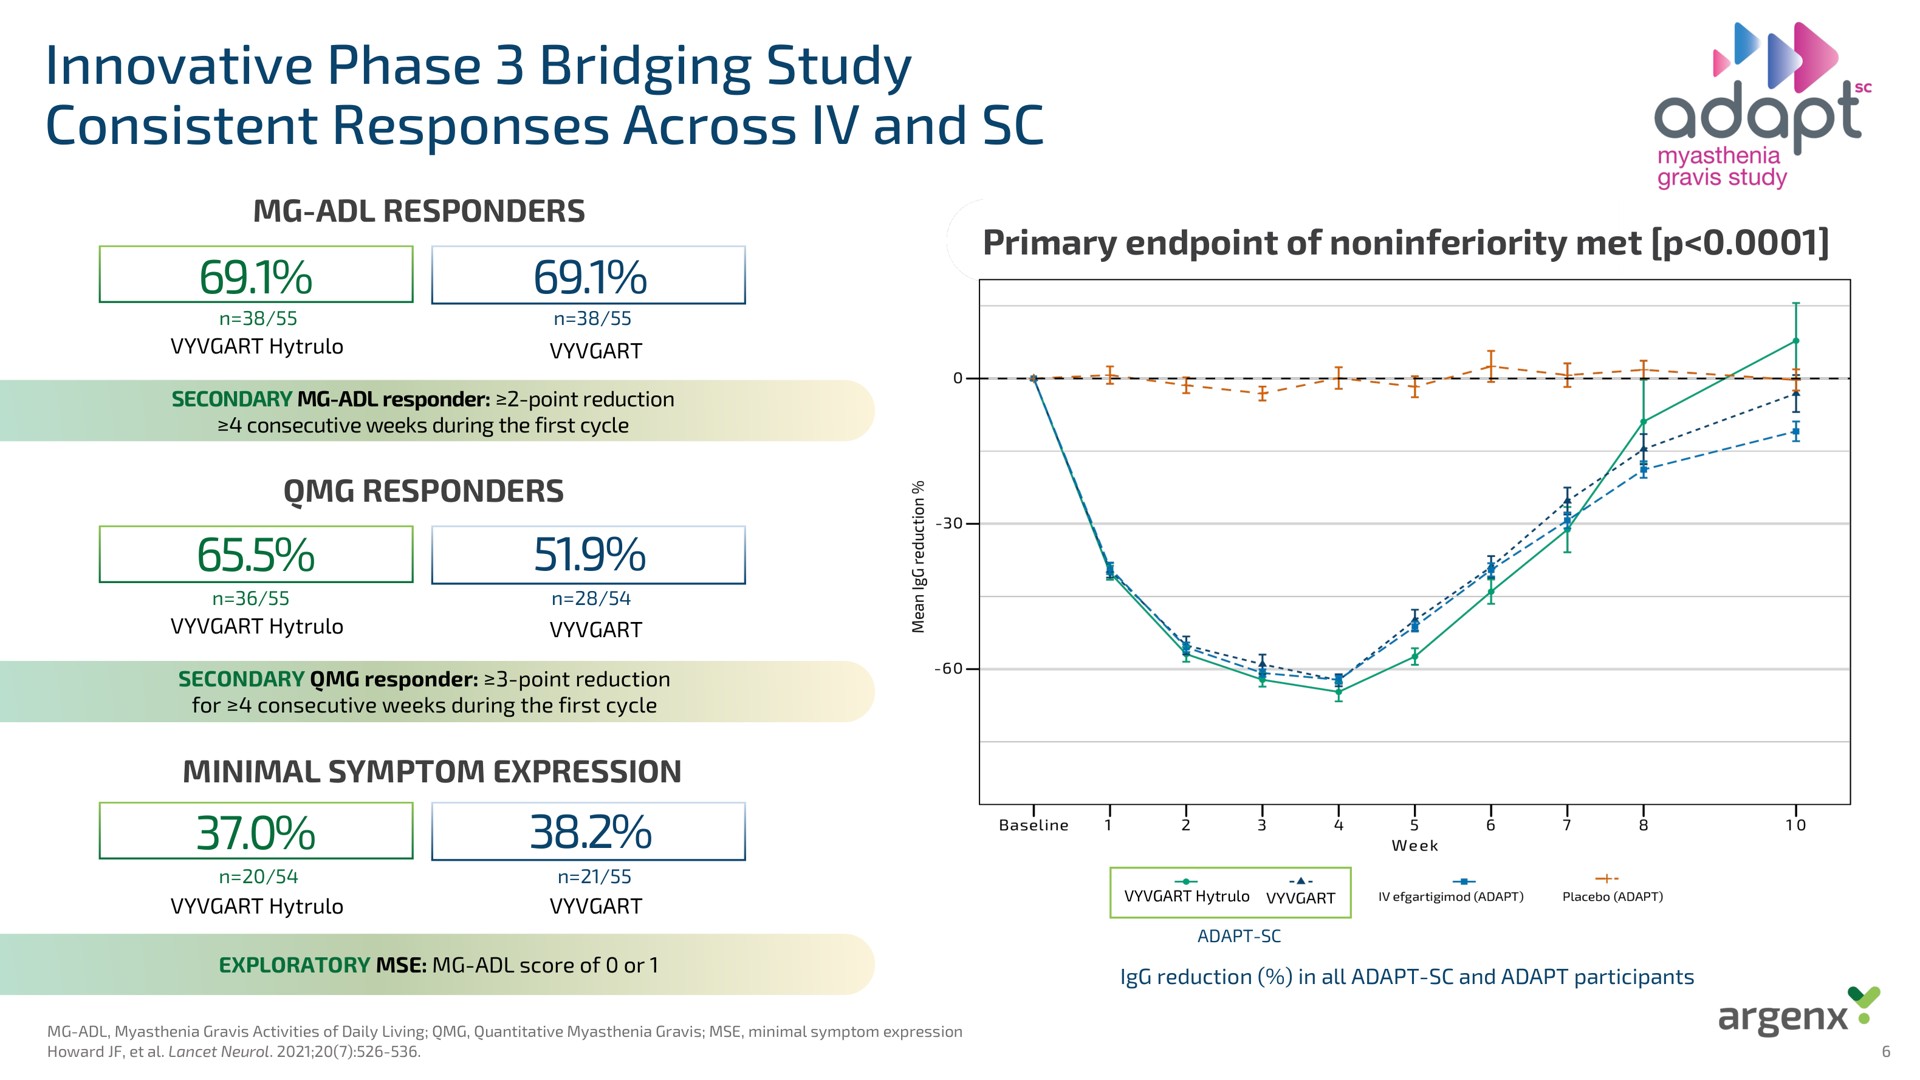 innovative phase bridging study consistent responses across and adapt | argenx SE